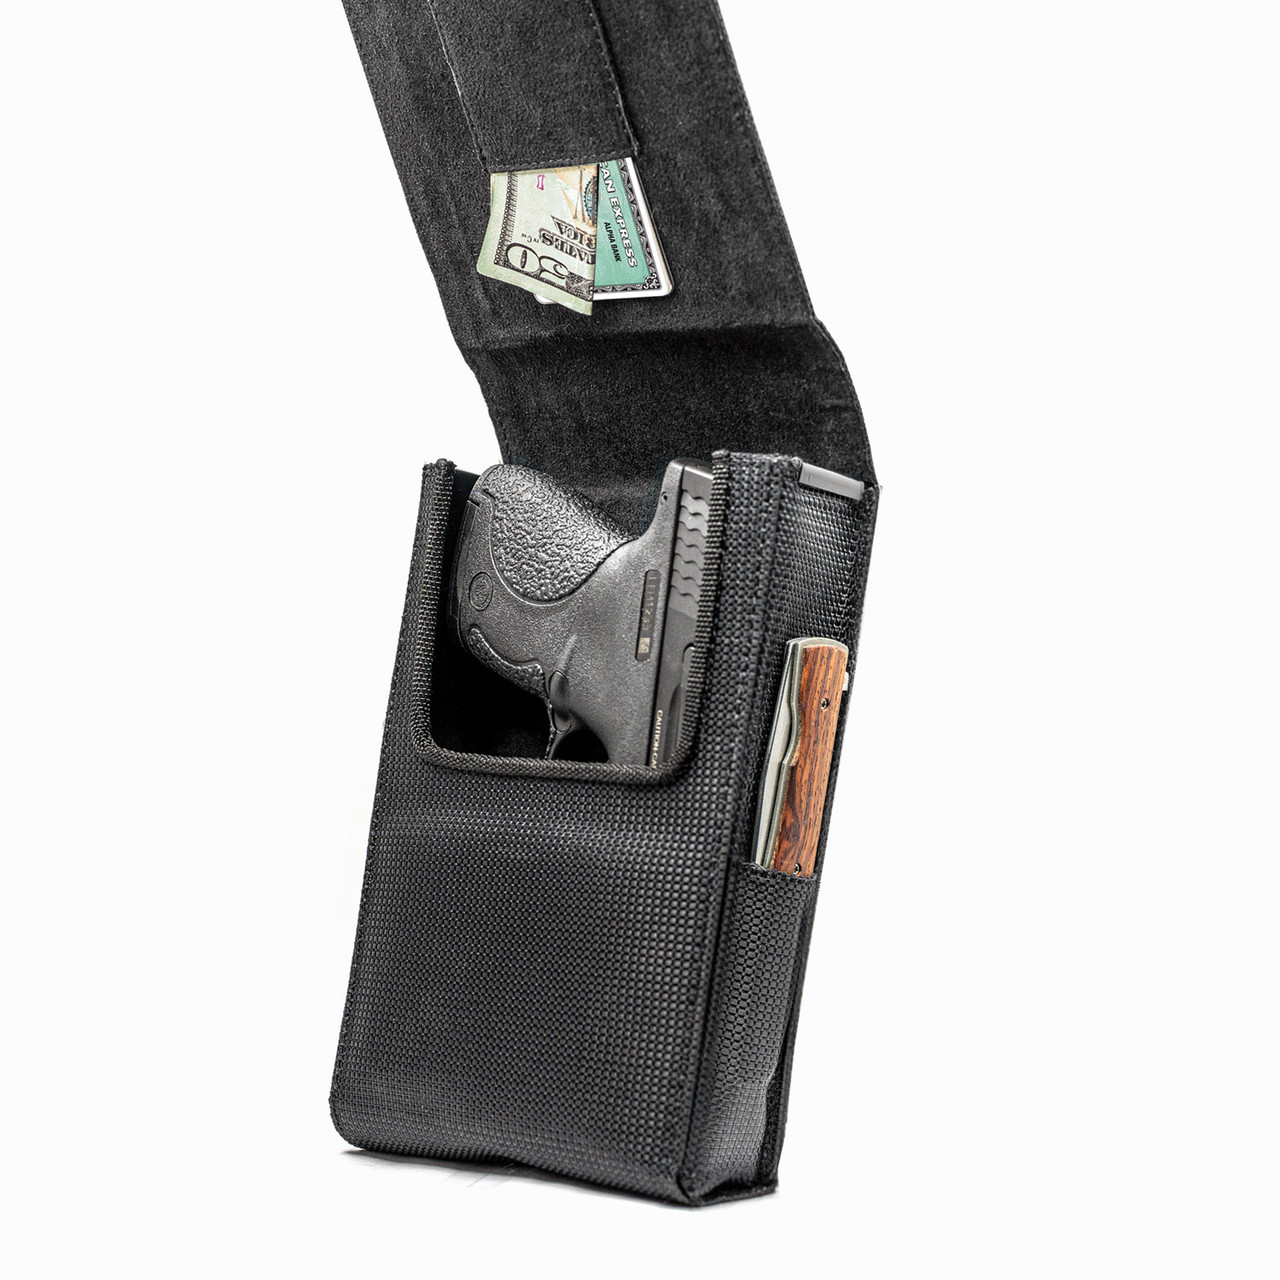 The SCCY CPX-2 Perfect Holster